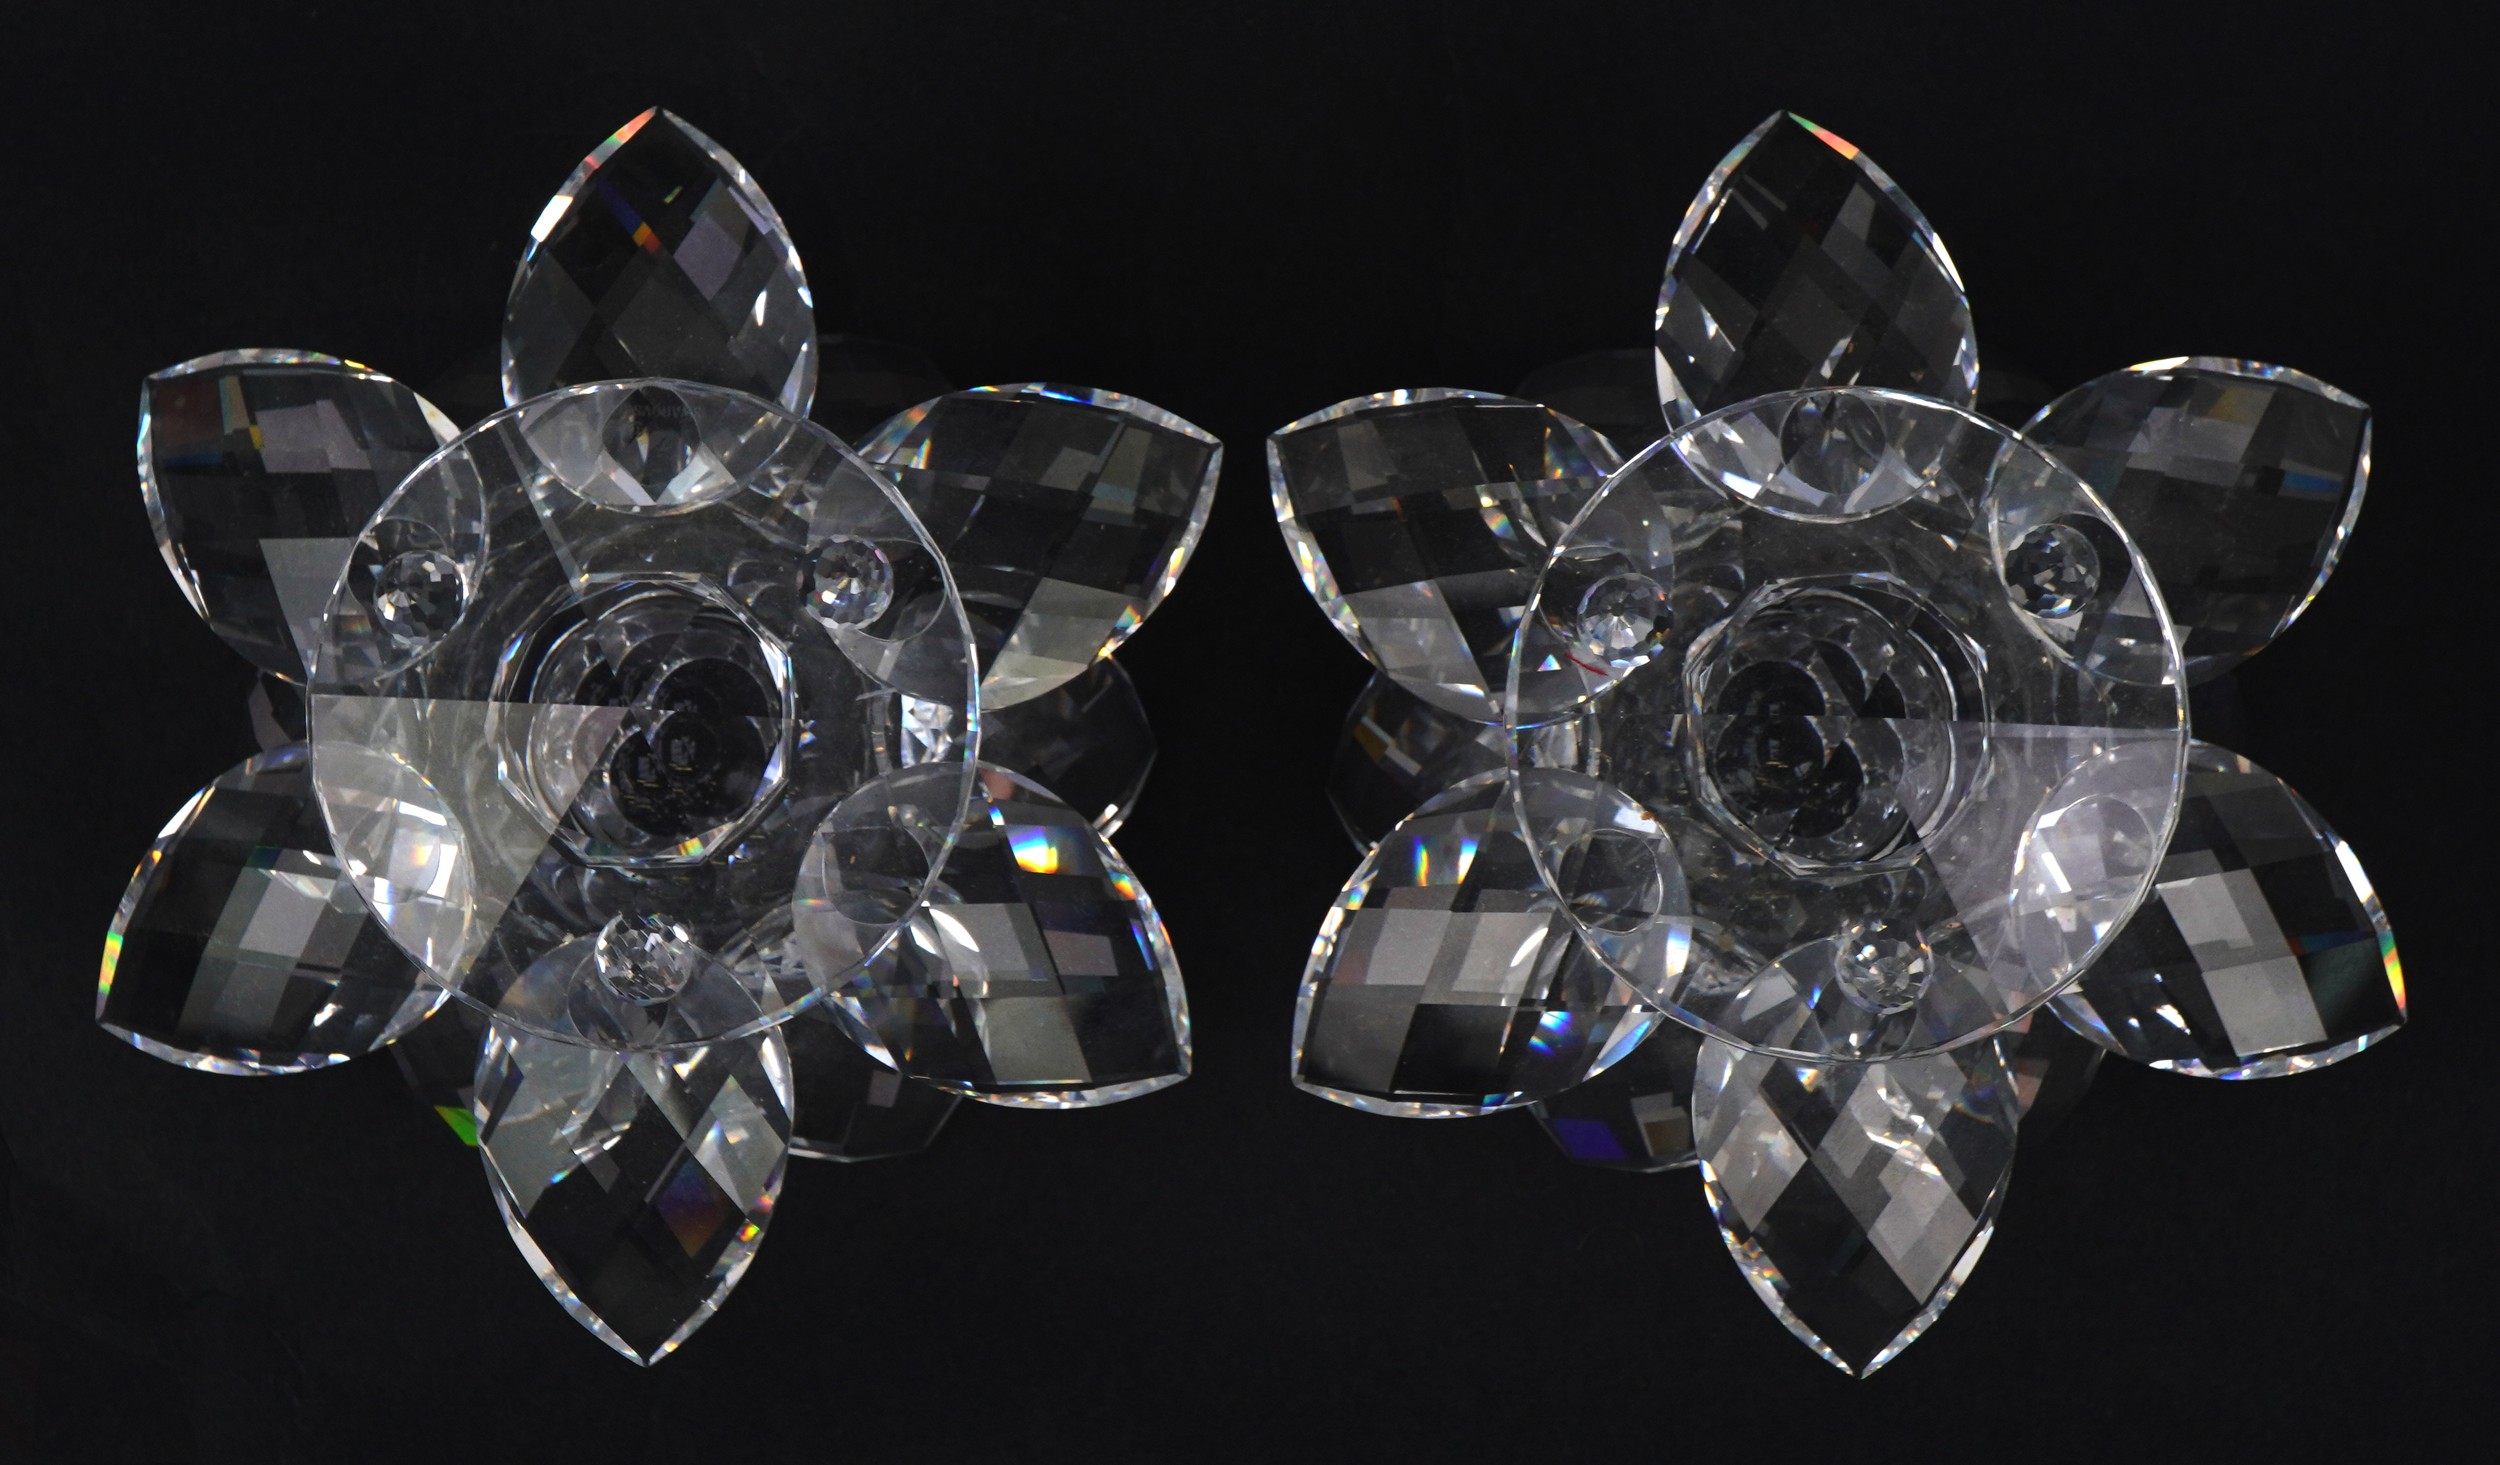 Pair of Swarovski Crystal waterlily candleholders, 14cm wide : For further information on this lot - Image 3 of 4